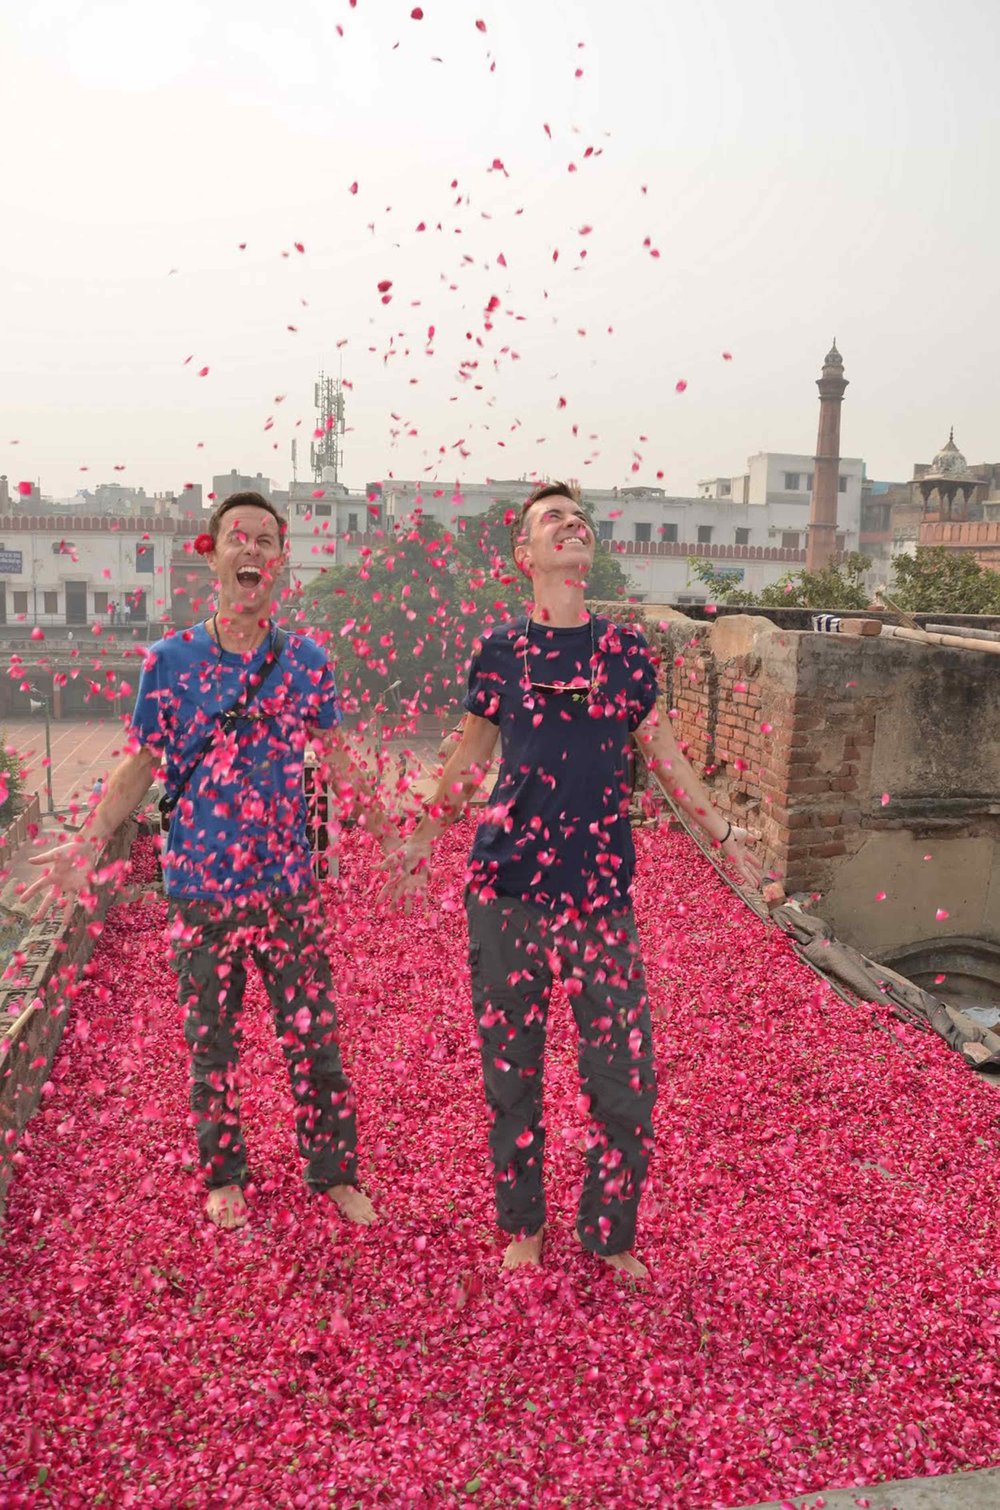  Climbing barefoot into the rose petal covered rooftop in Old Delhi was a magical moment for us both.&nbsp; 